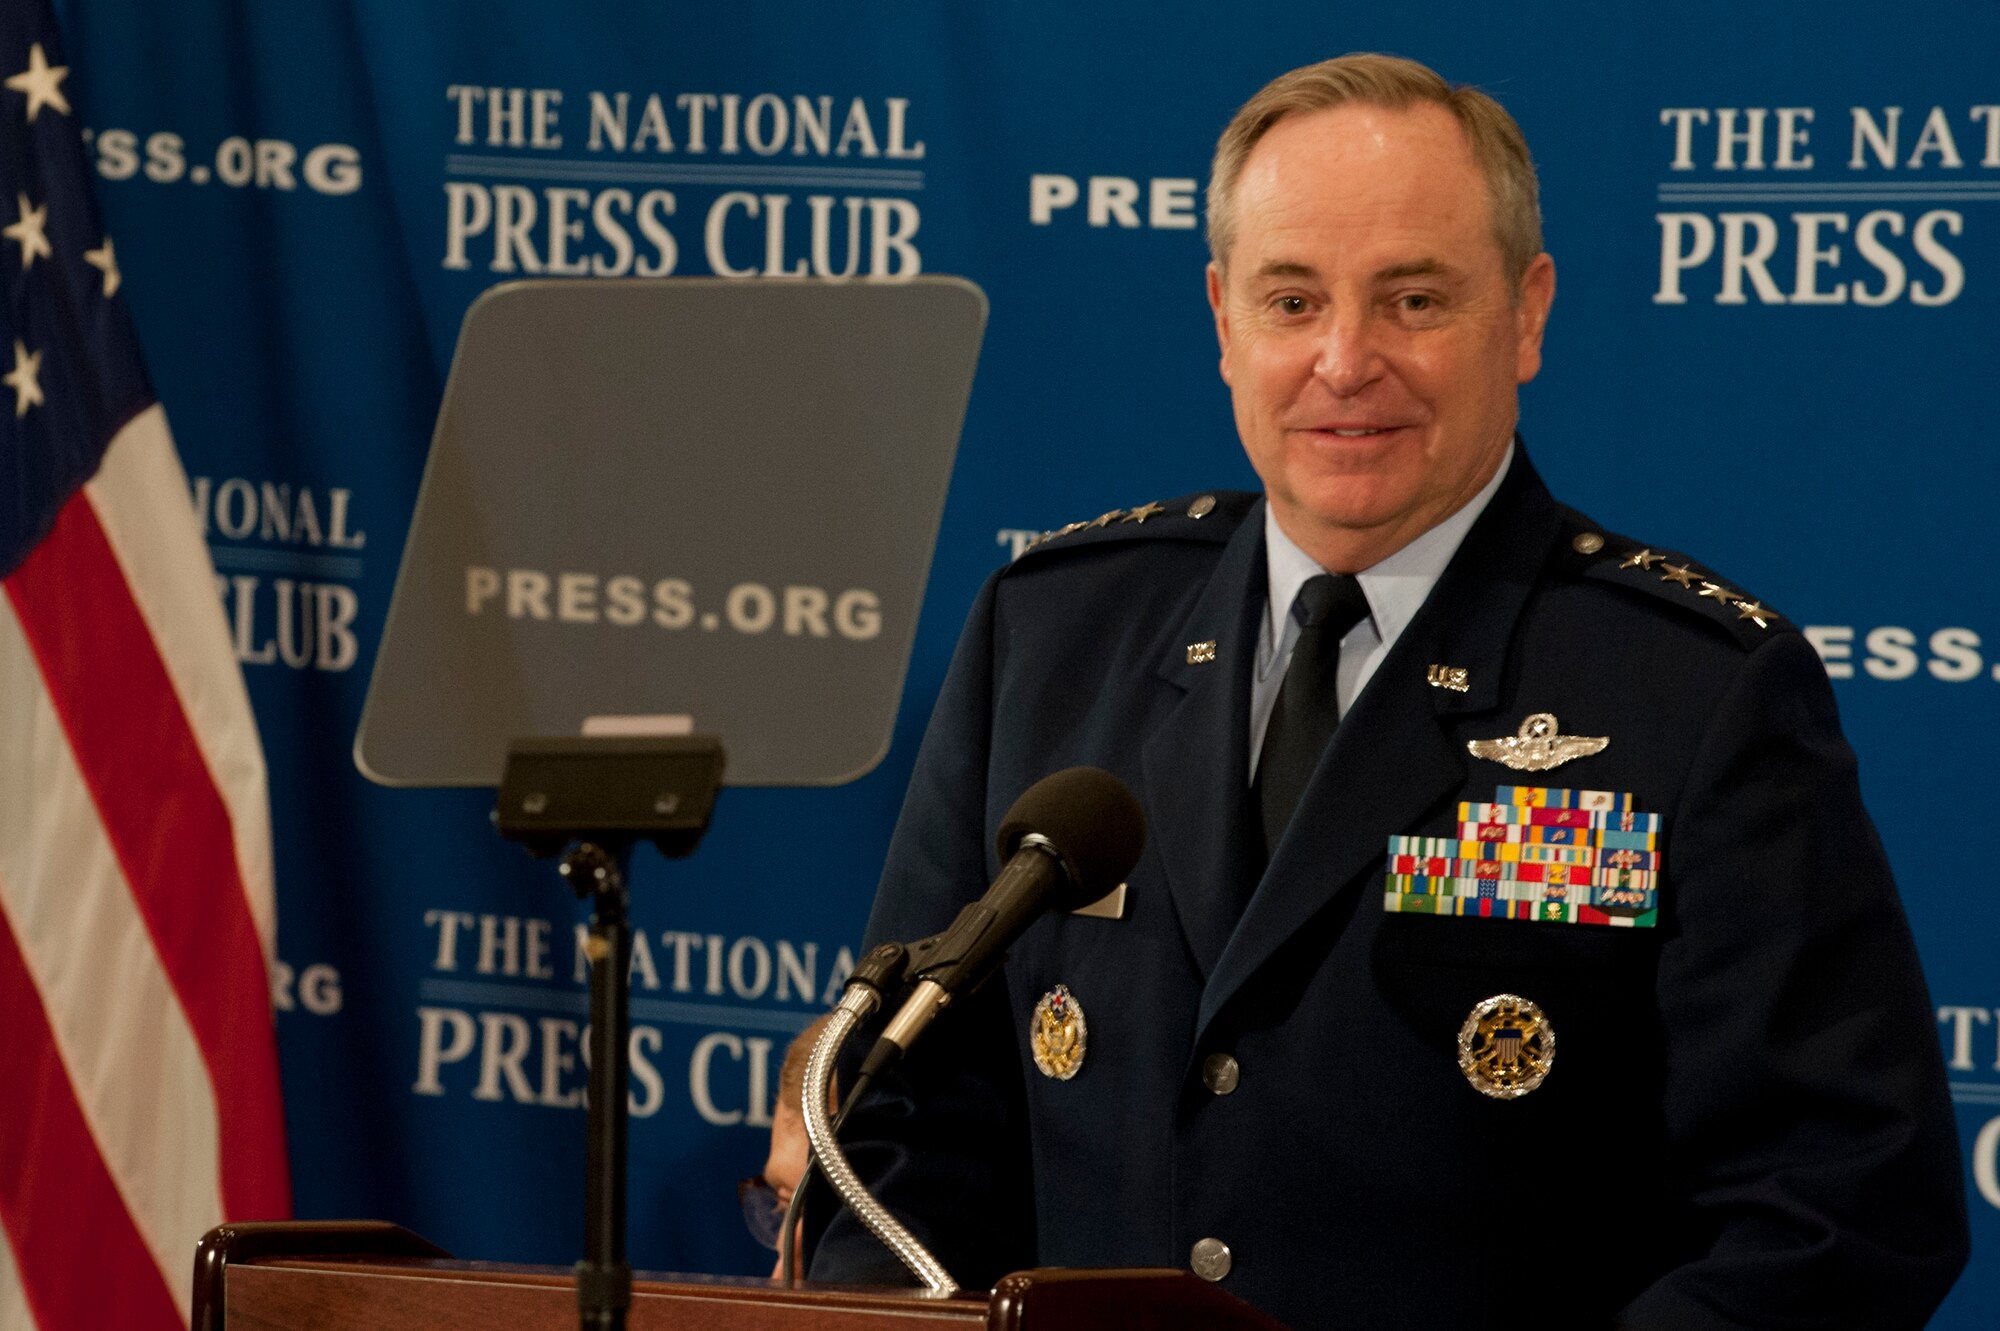 Air Force Chief of Staff Gen. Mark A. Welsh III speaks at the National Press Club in Washington, April 23, 2014. Welsh provided attendees a glimpse into the future of the Air Force and completed a question and answer session to conclude the breakfast. (U.S. Air Force photo/Staff Sgt. Carlin Leslie)
